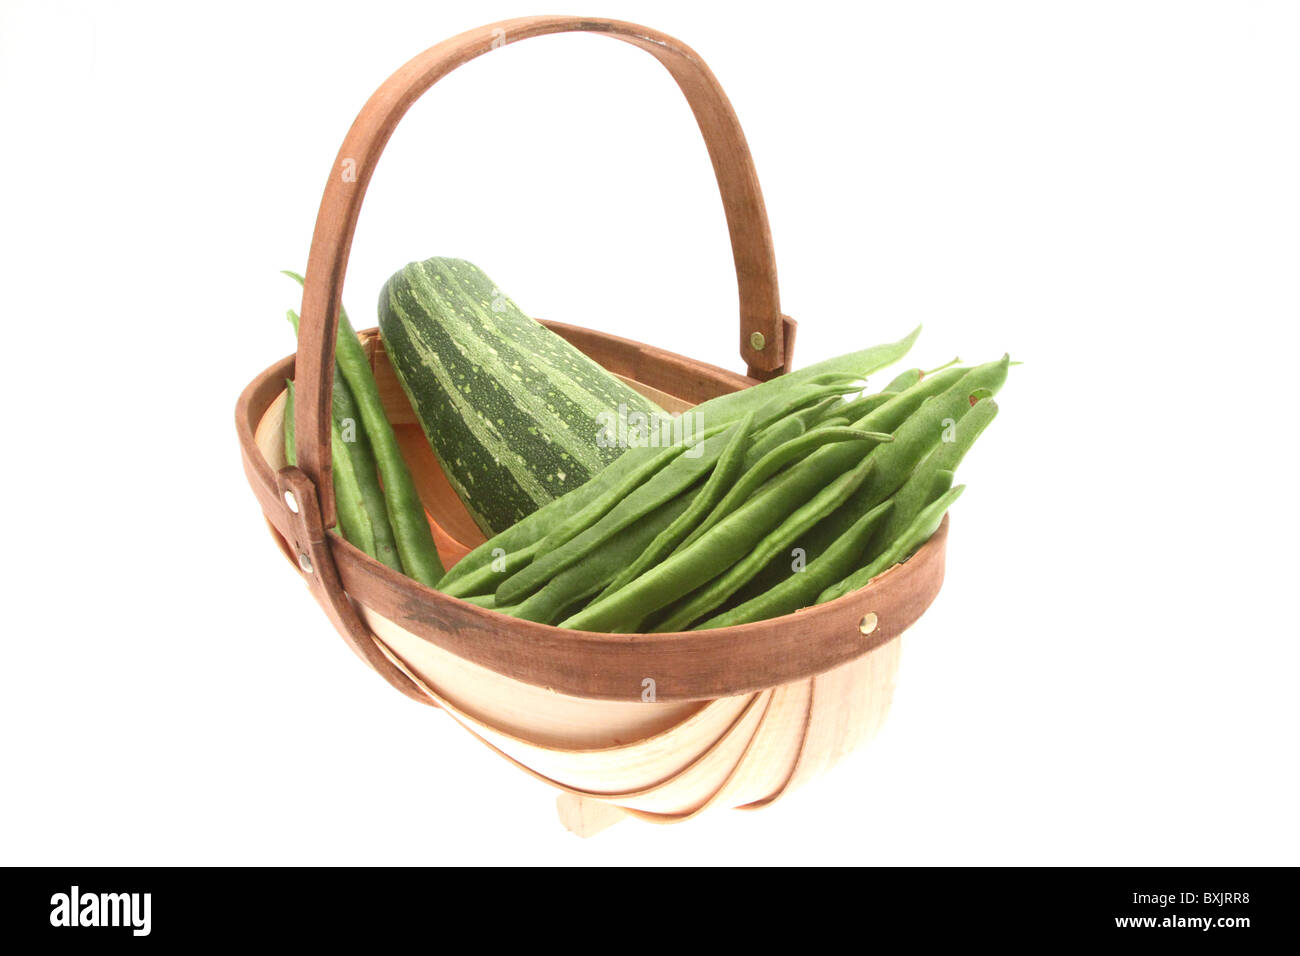 Gardeners trug with fresh vegetables from the garden Stock Photo